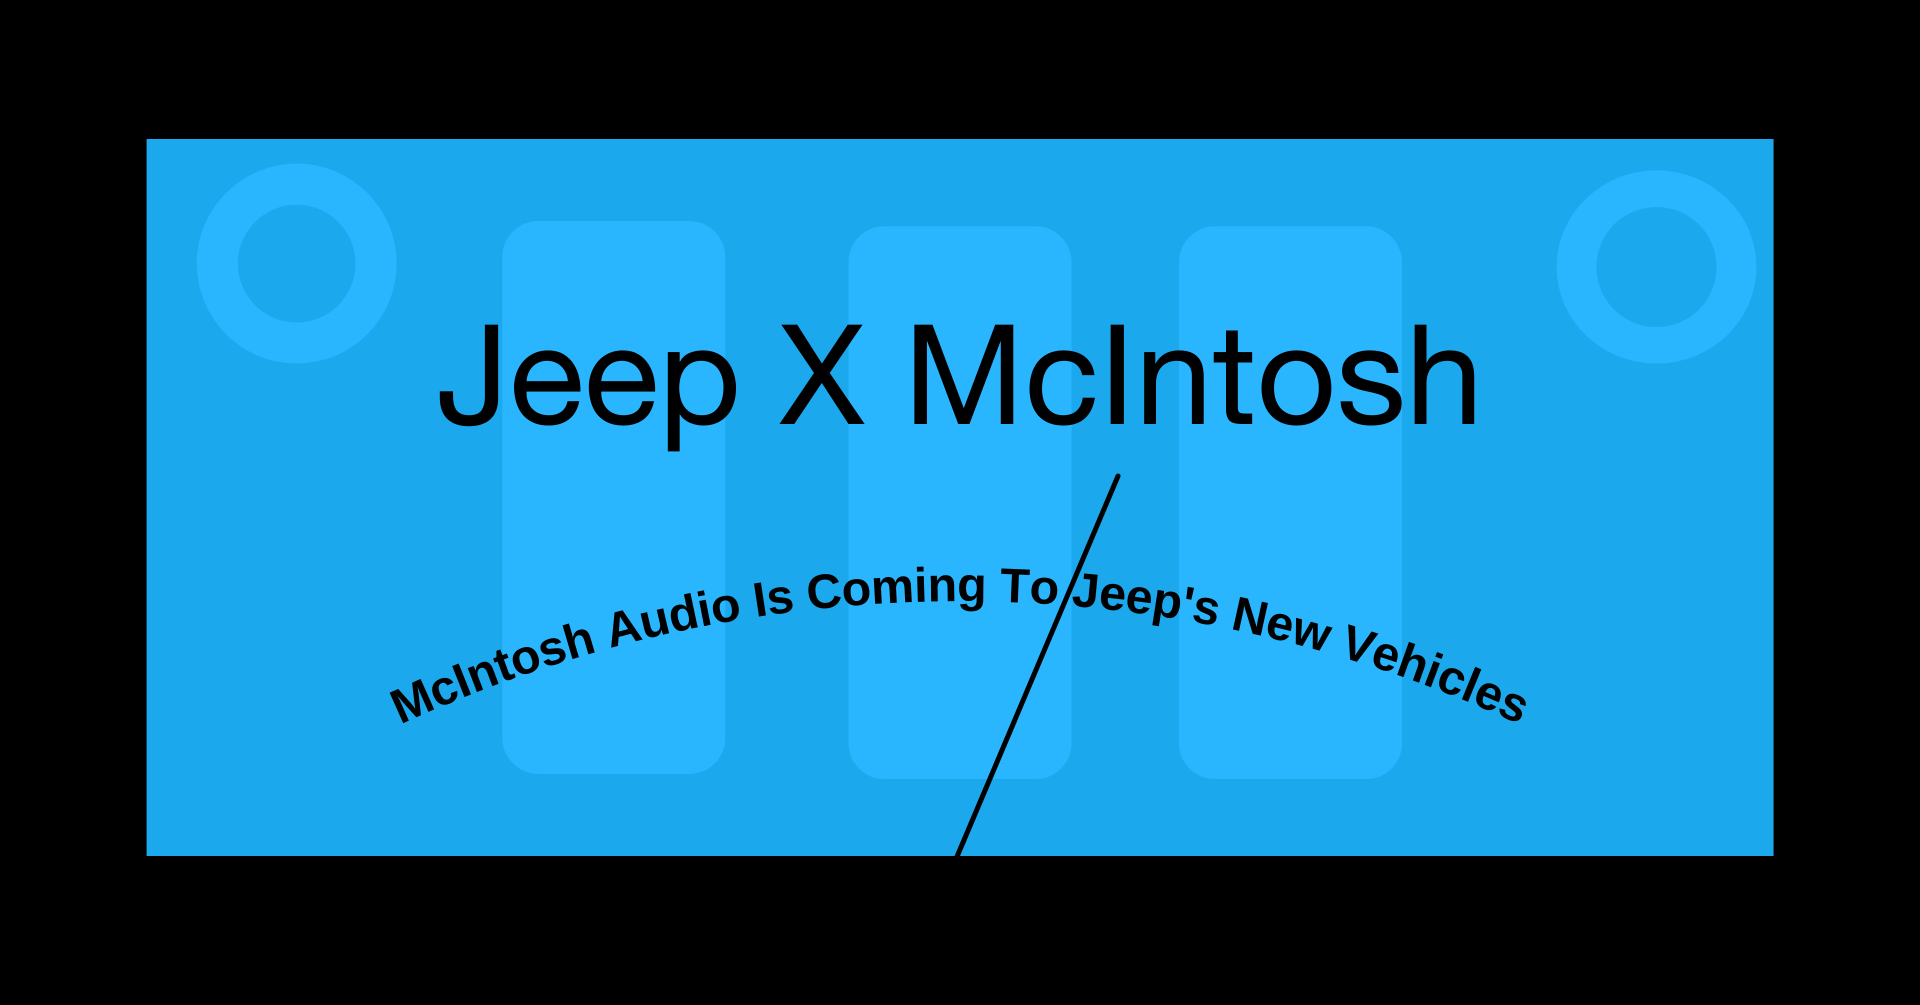 McIntosh Audio is coming to Jeep Vehicles